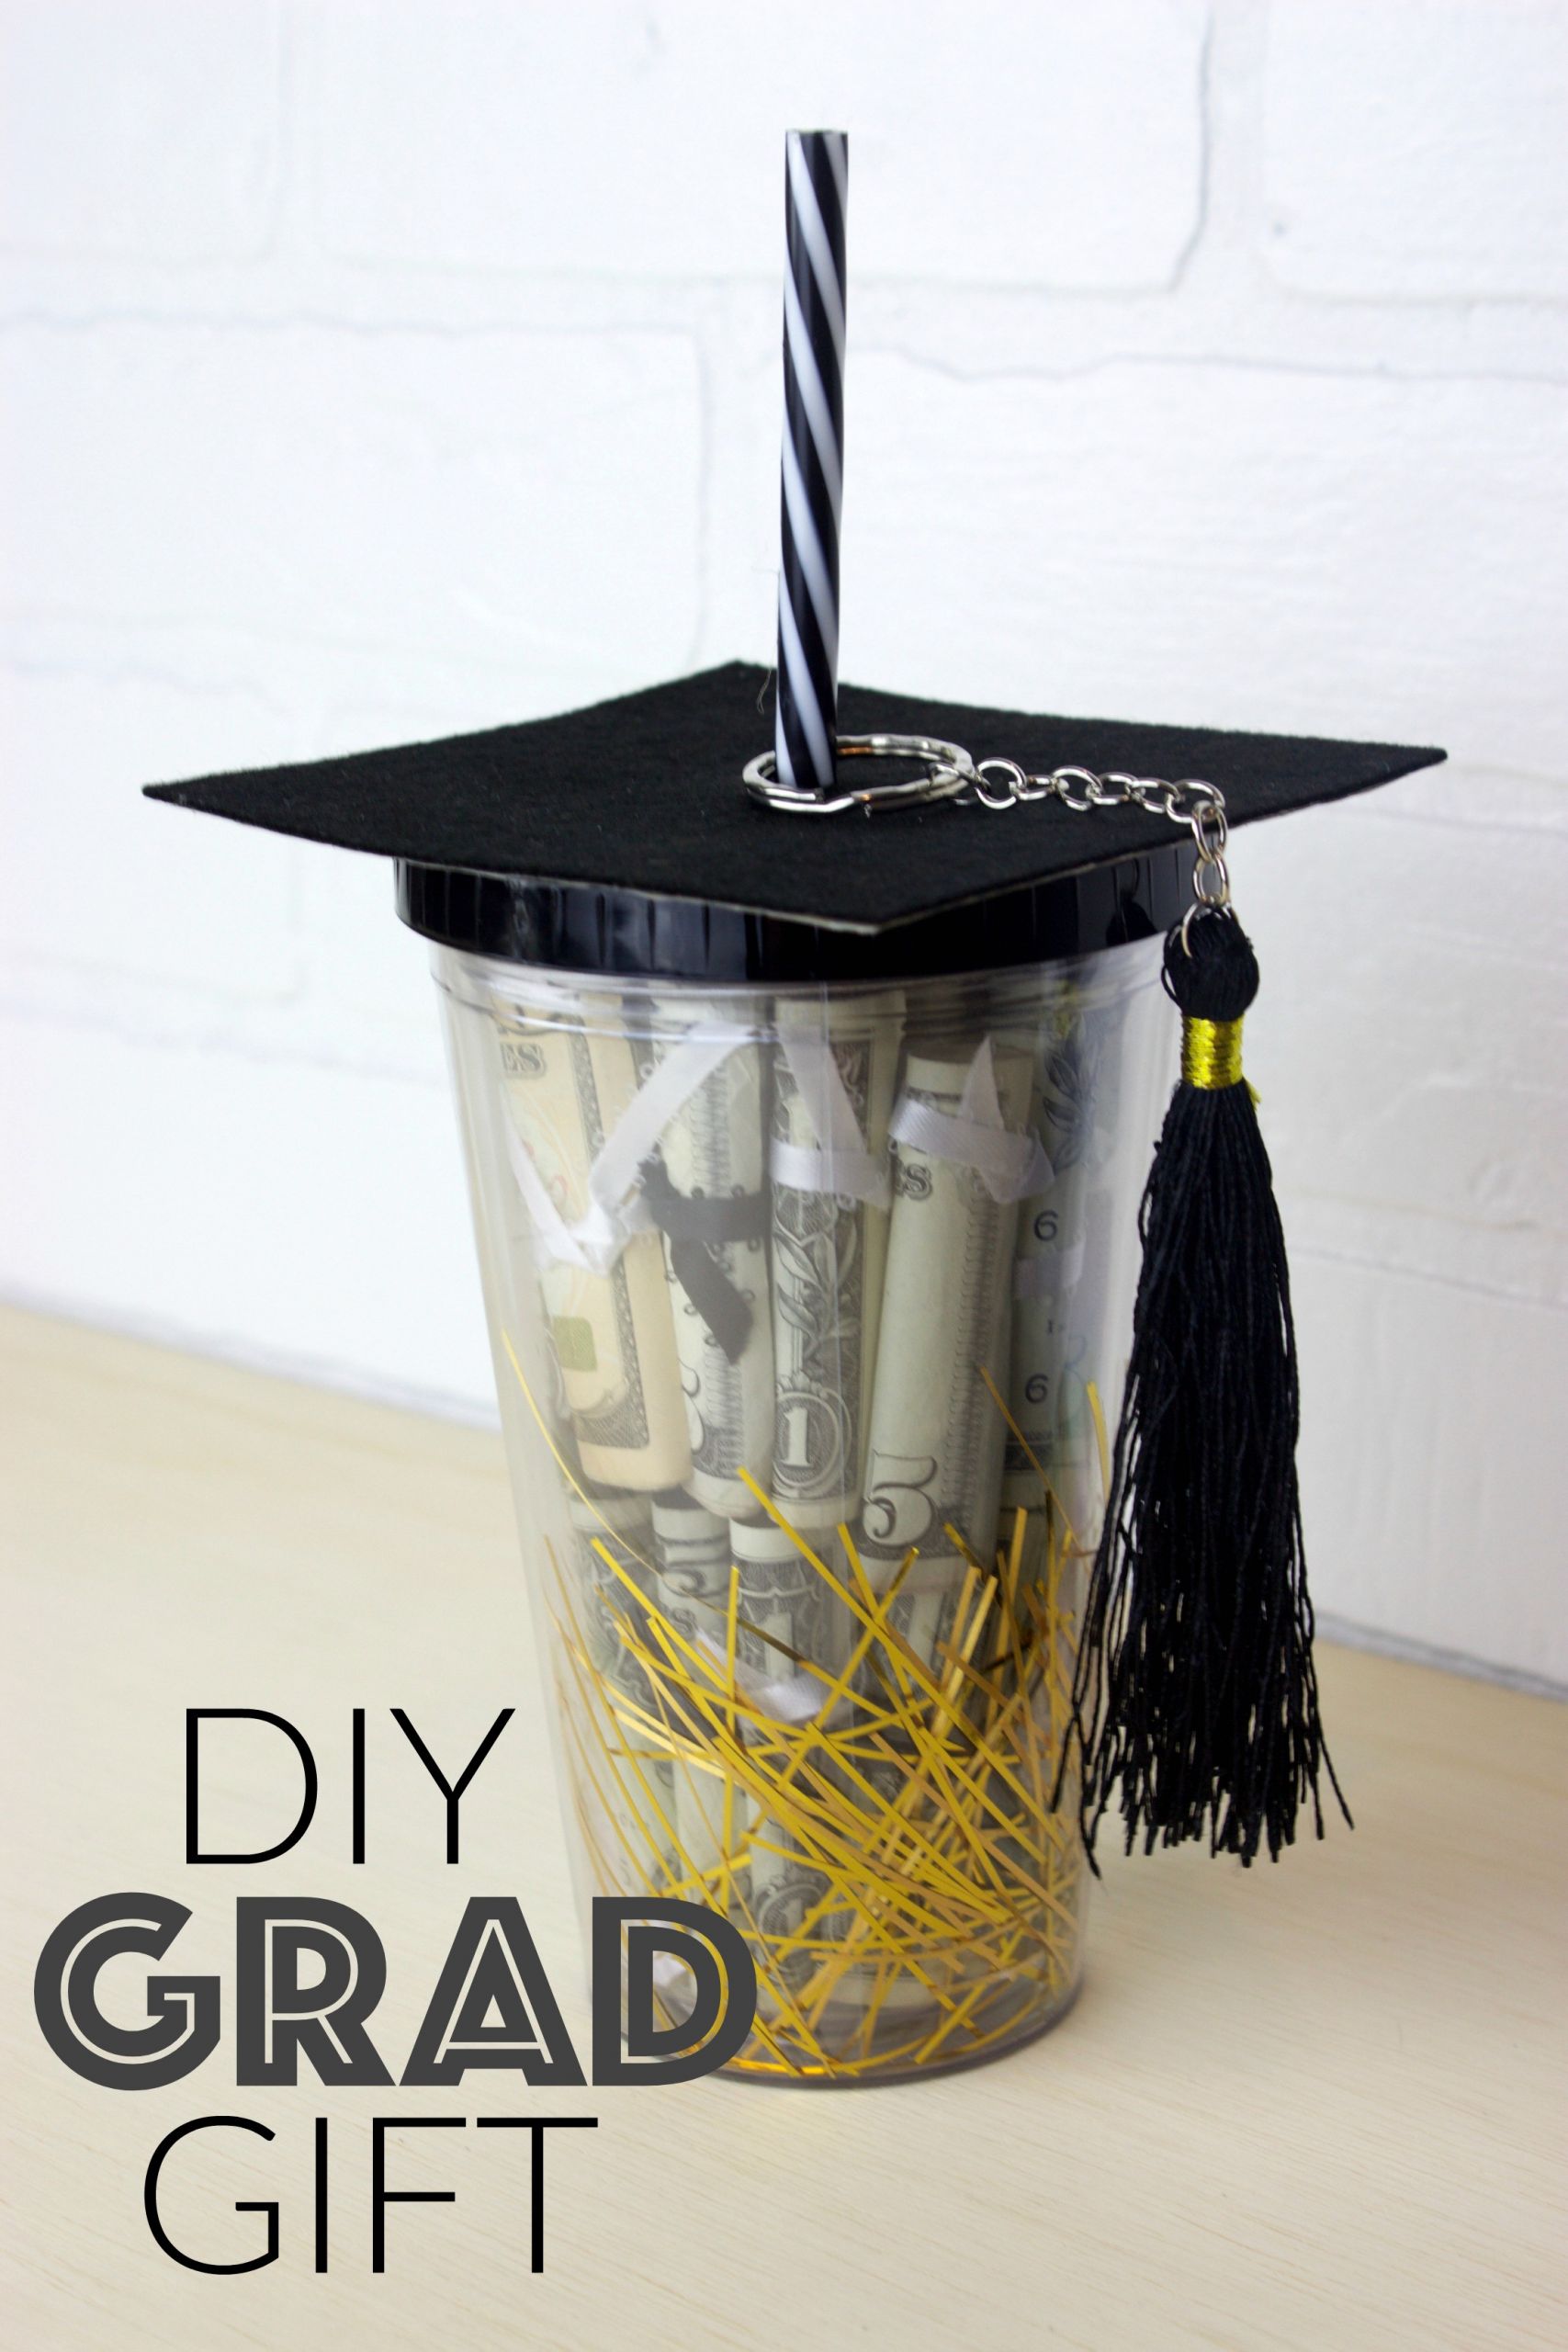 DIY Graduation Gifts For Him
 DIY Graduation Gift in a Cup